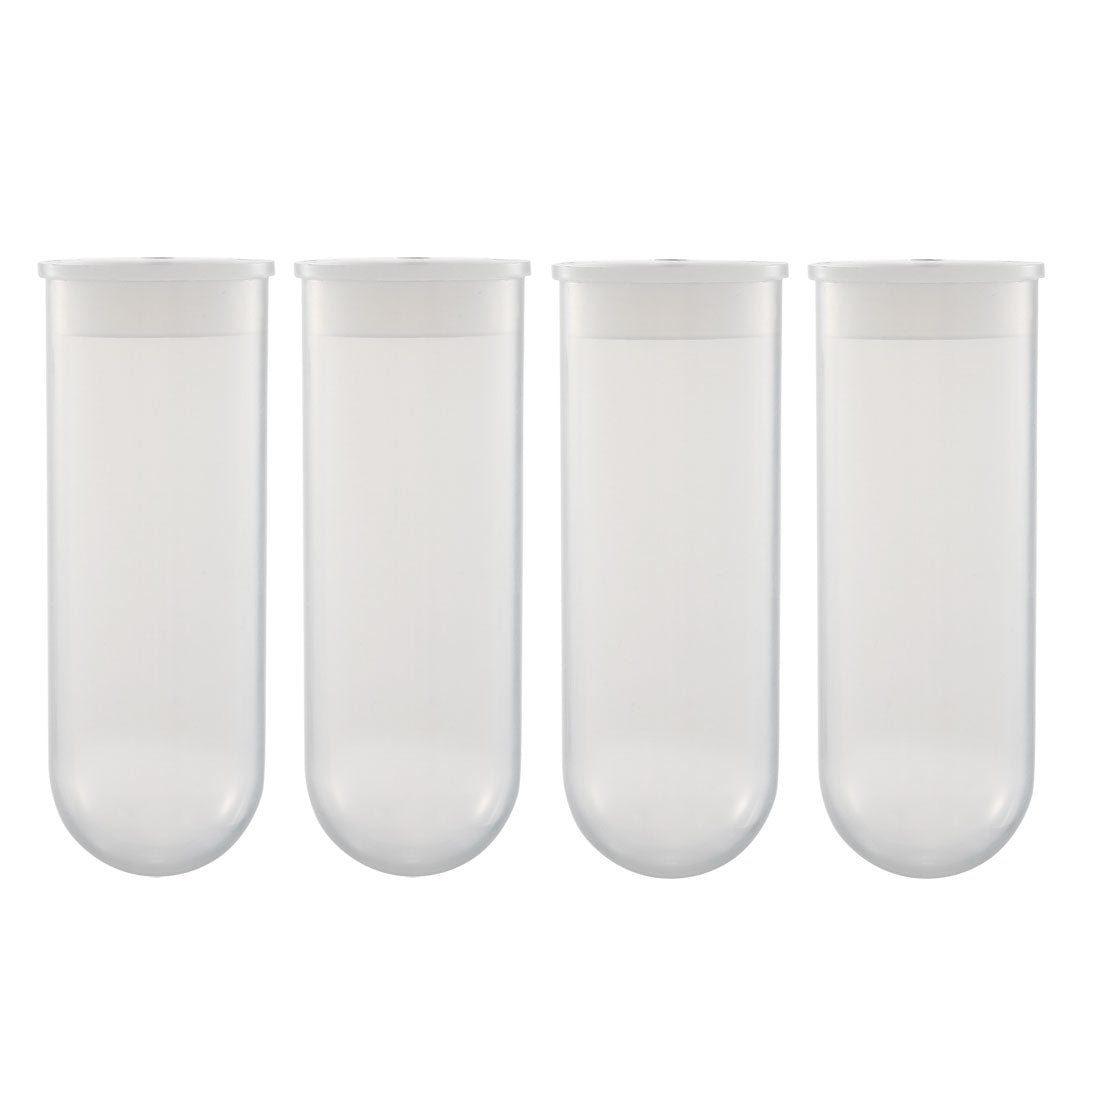 uxcell Uxcell 10 Pcs 100ml Plastic Centrifuge Tubes with Attached Cap, Round Bottom